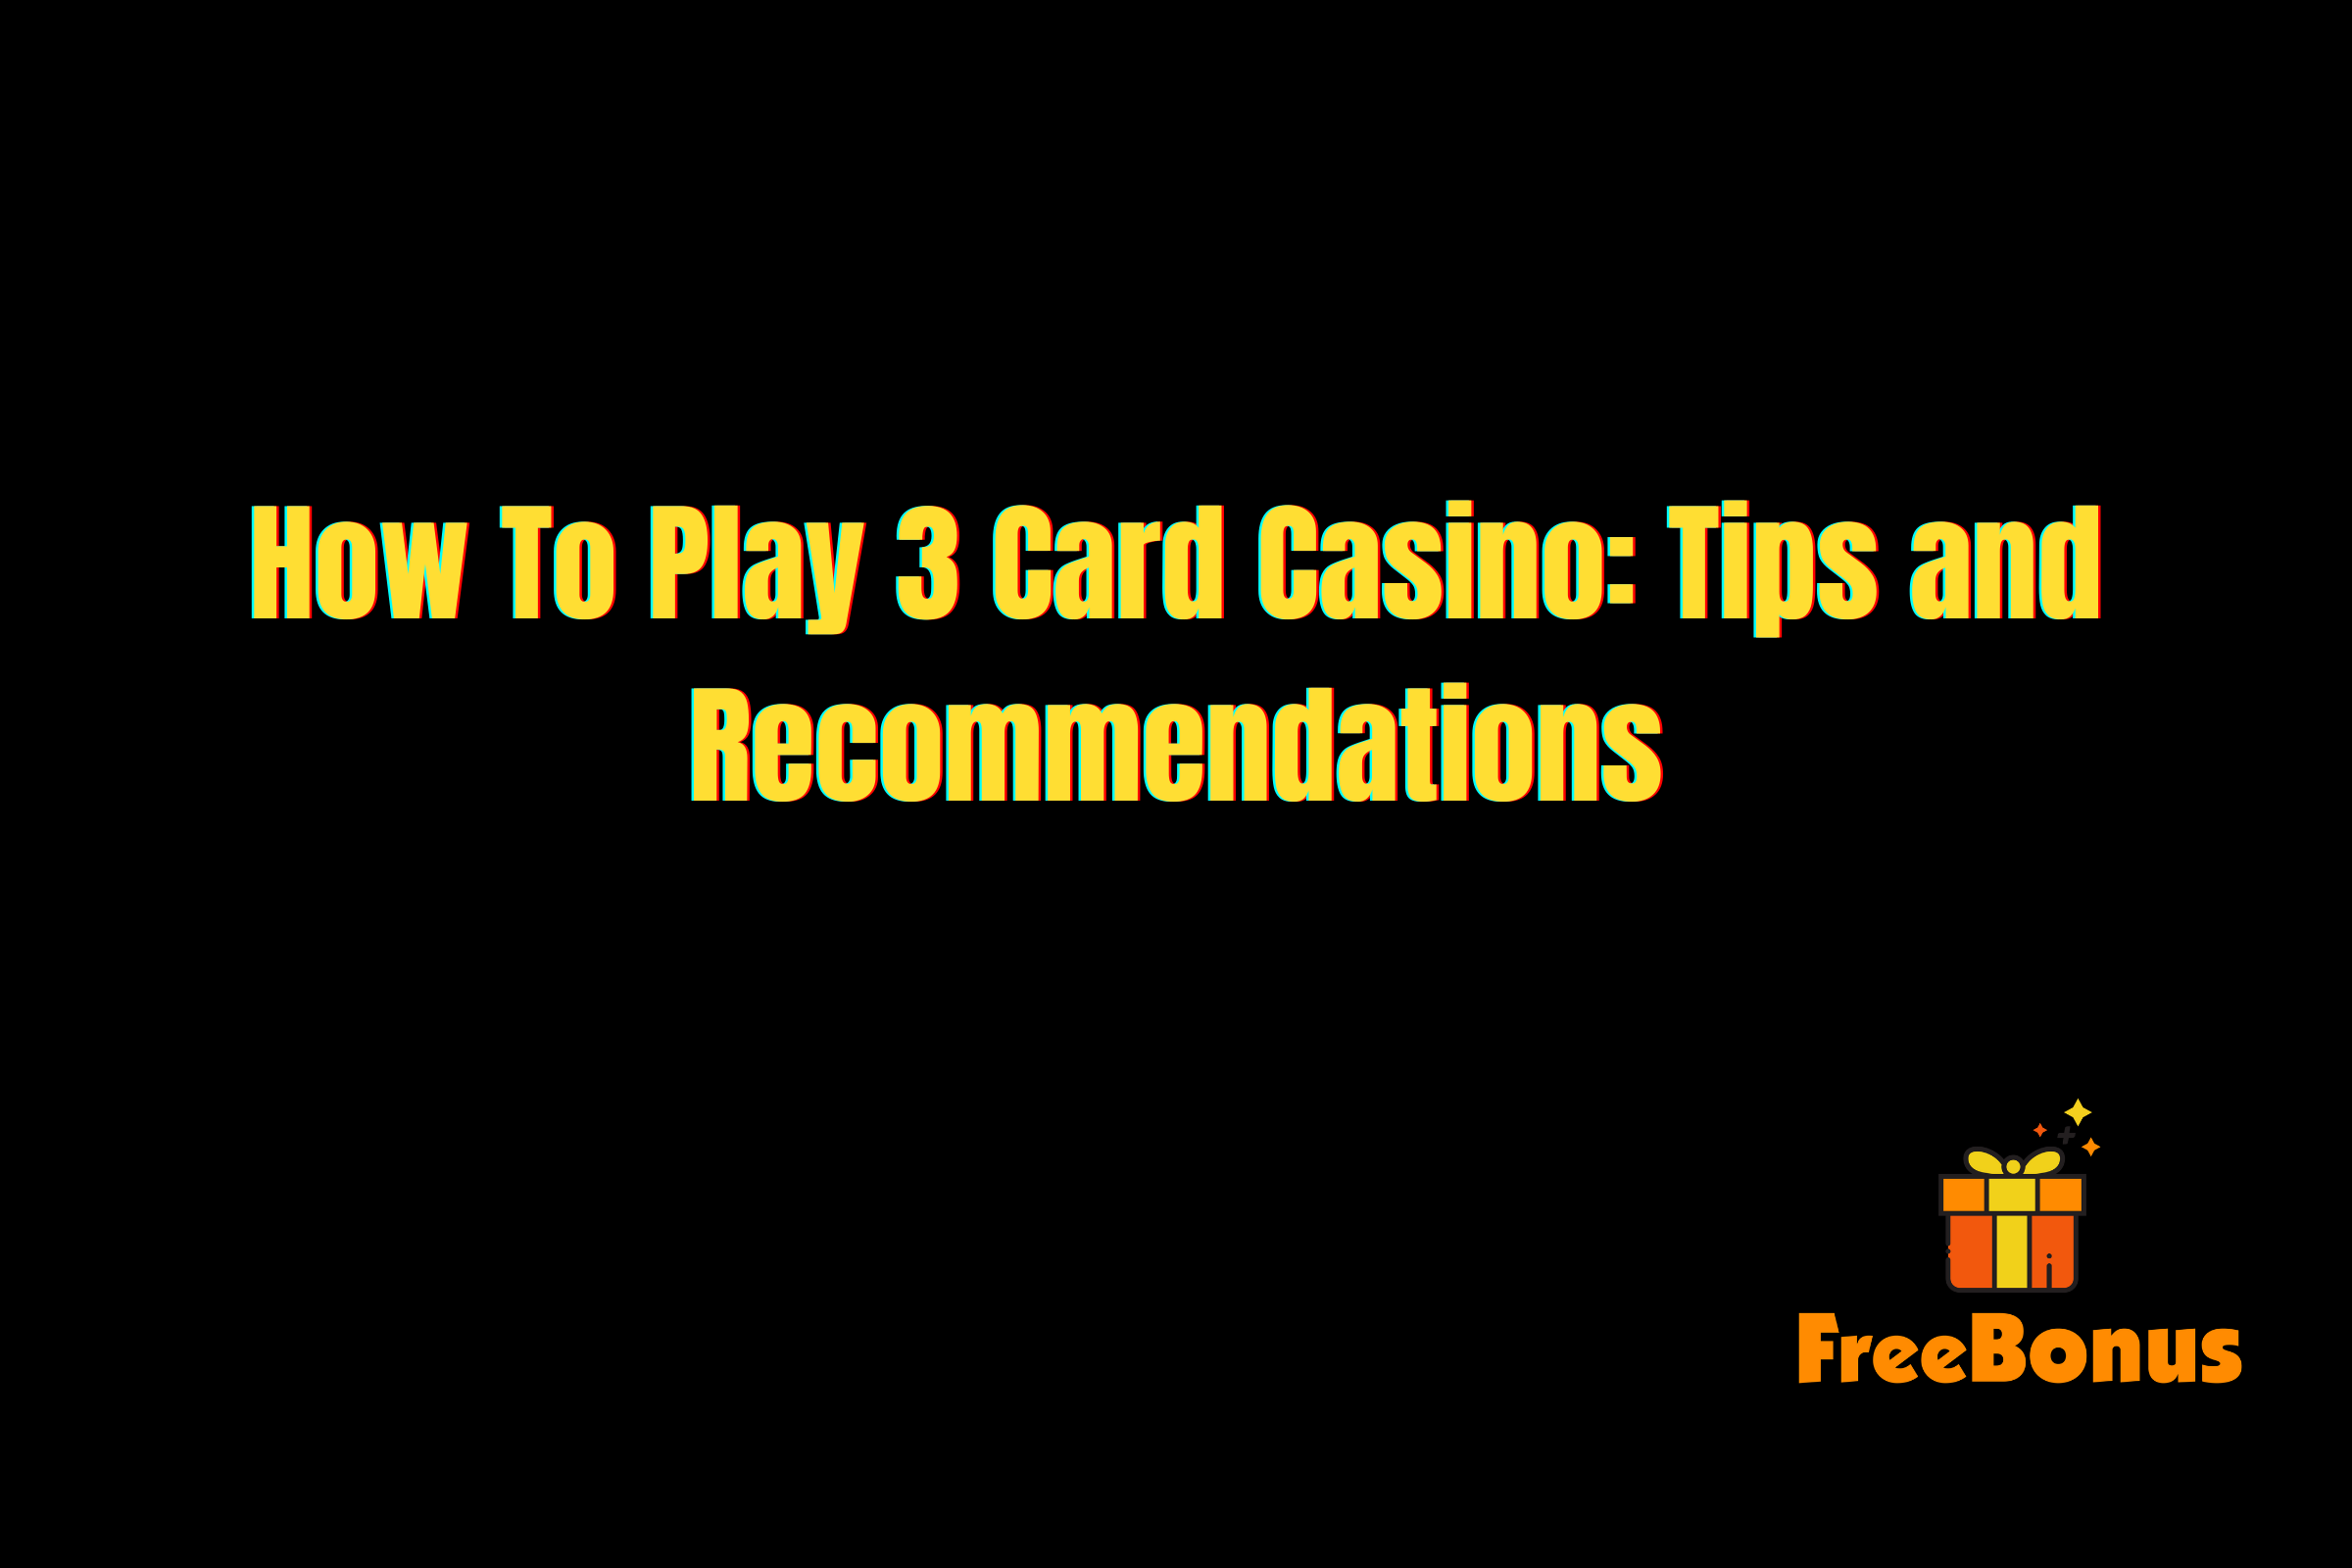 How To Play 3 Card Casino: Tips and Recommendations